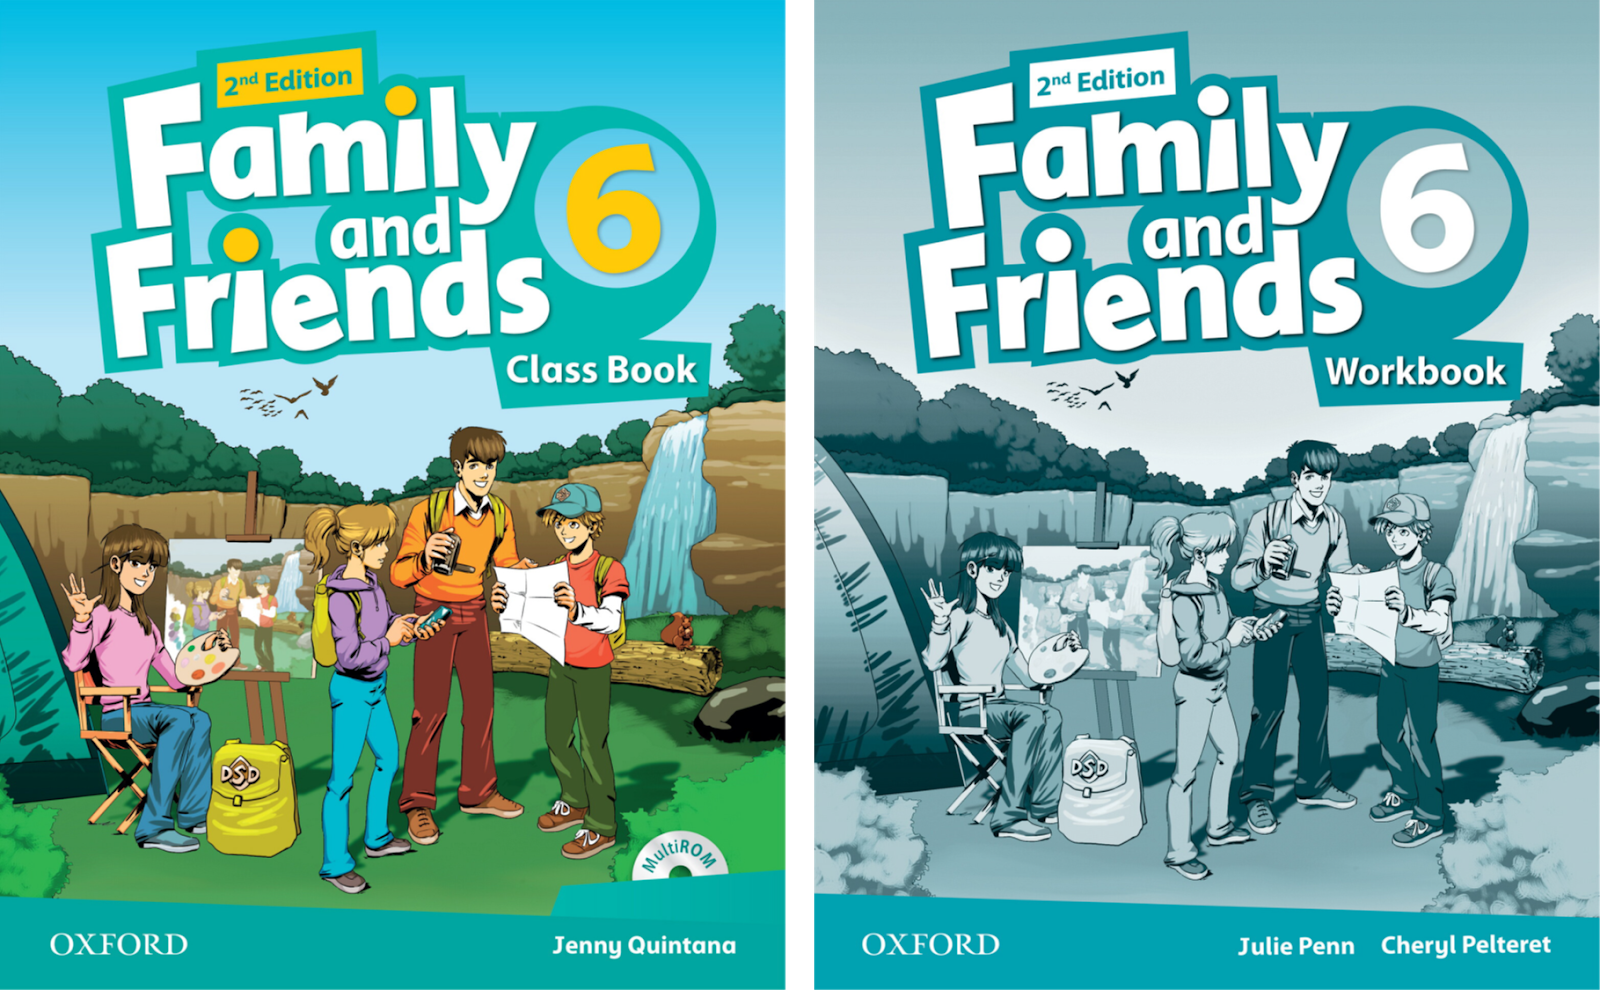 Wordwall family and friends 4. Family and friends 2 первое издание. Family and friends 2 2nd Edition Classbook. \Фэмили энд френдс 2 издание. Family and friends 6 class book.